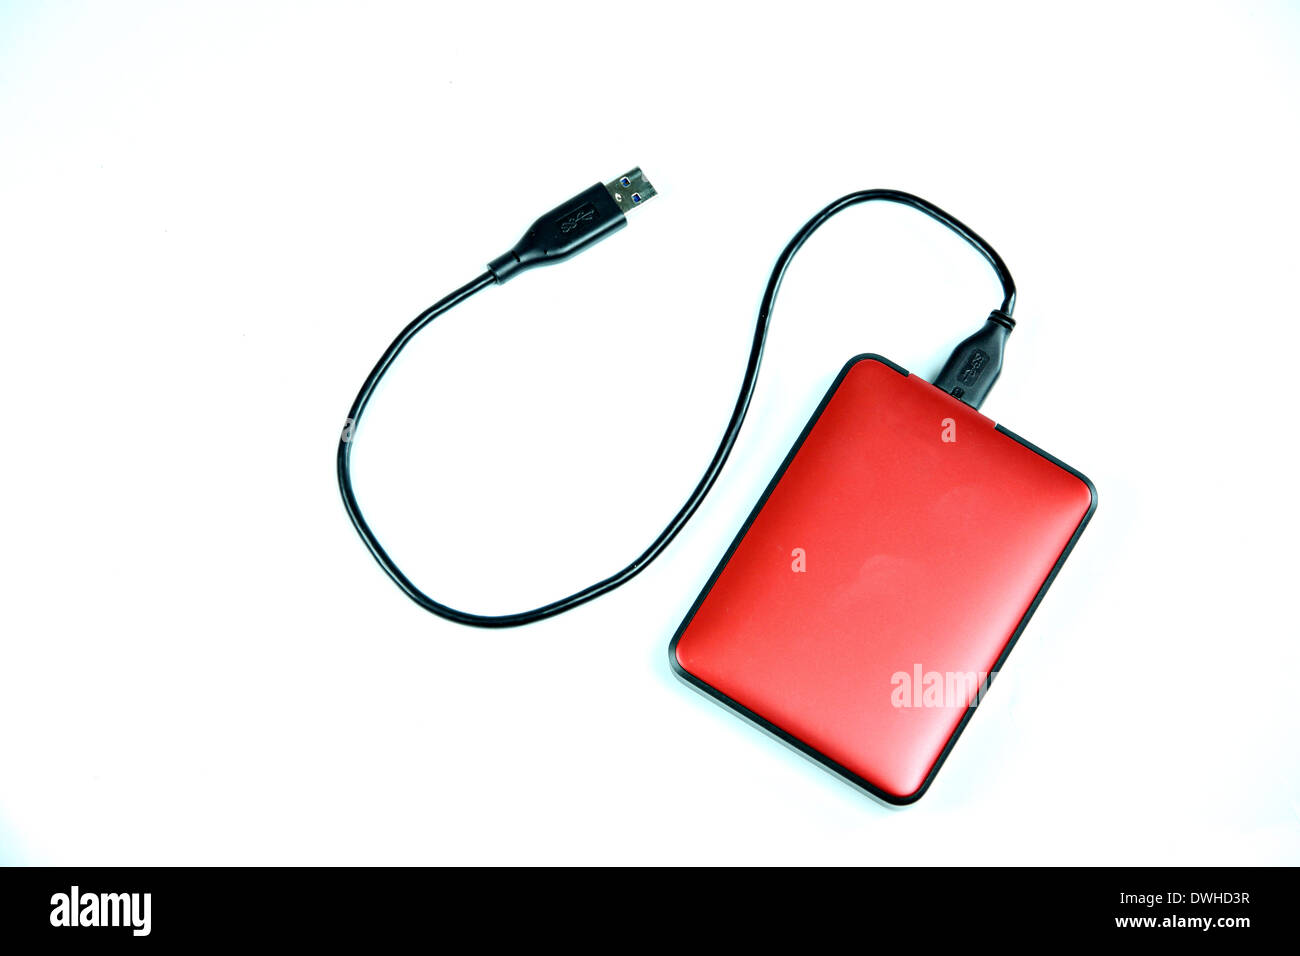 Red external hard disk isolated on white background. Stock Photo